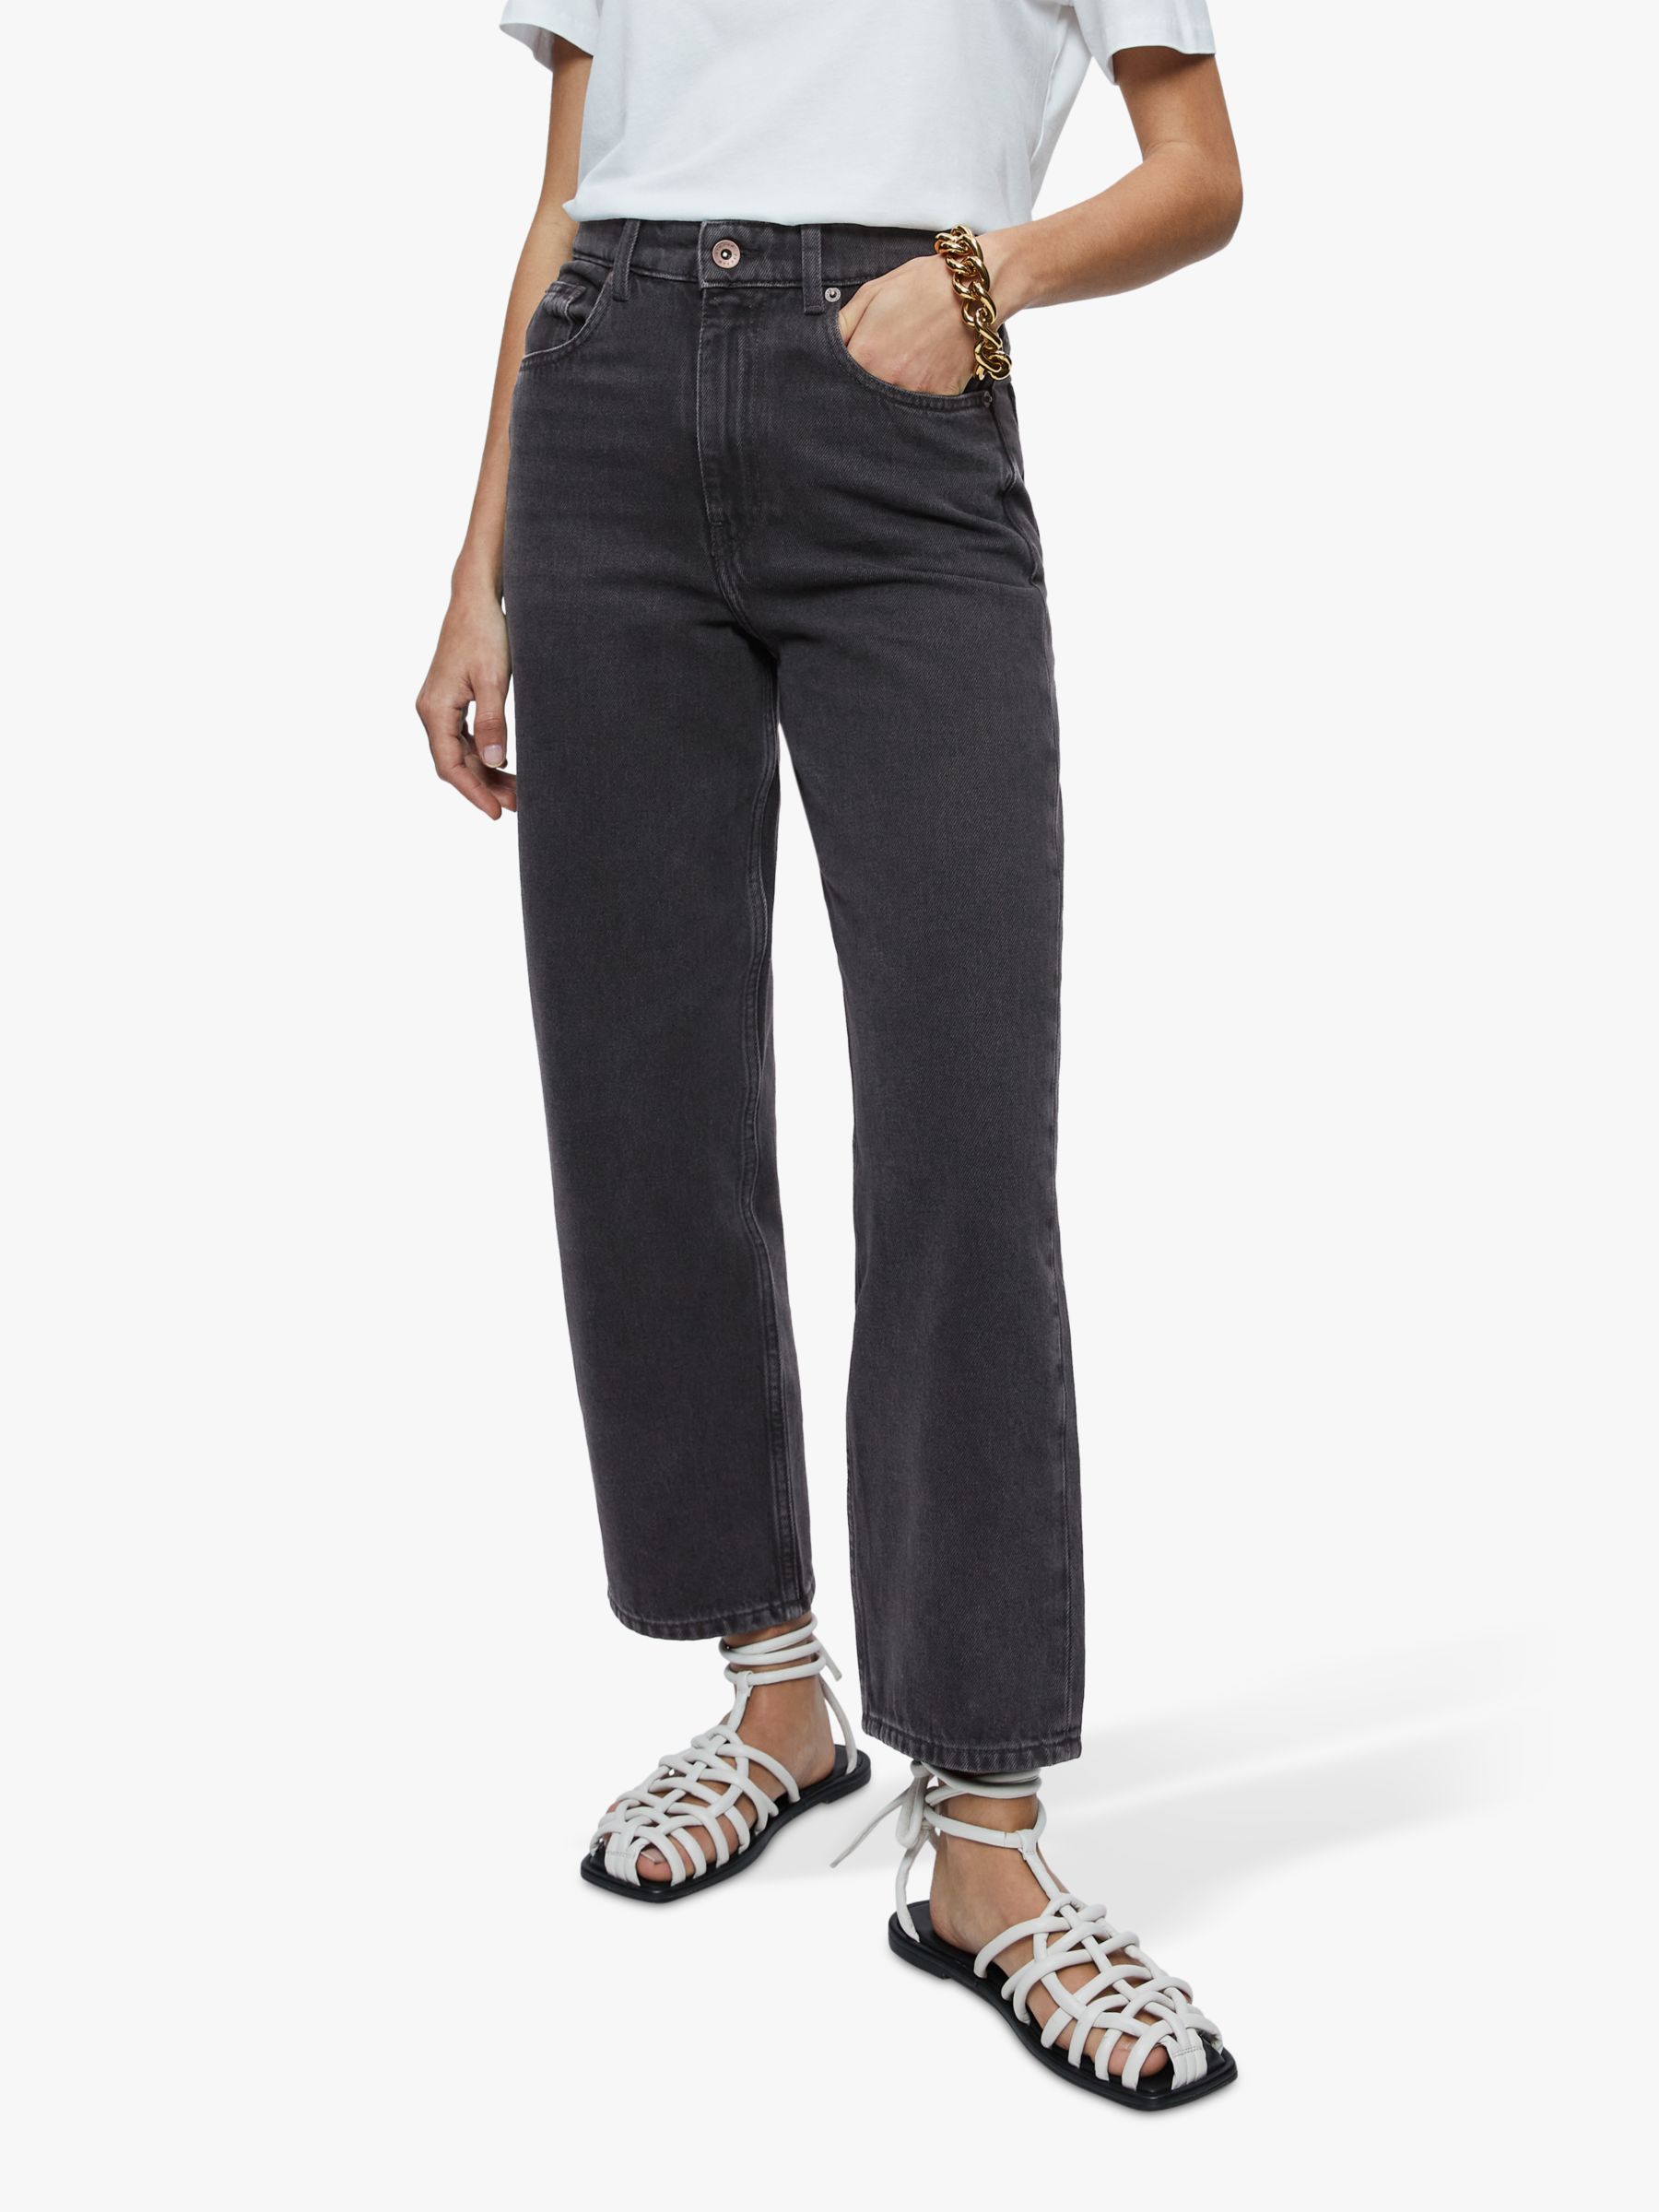 Jigsaw Delmont Jeans, Washed Black at John Lewis & Partners